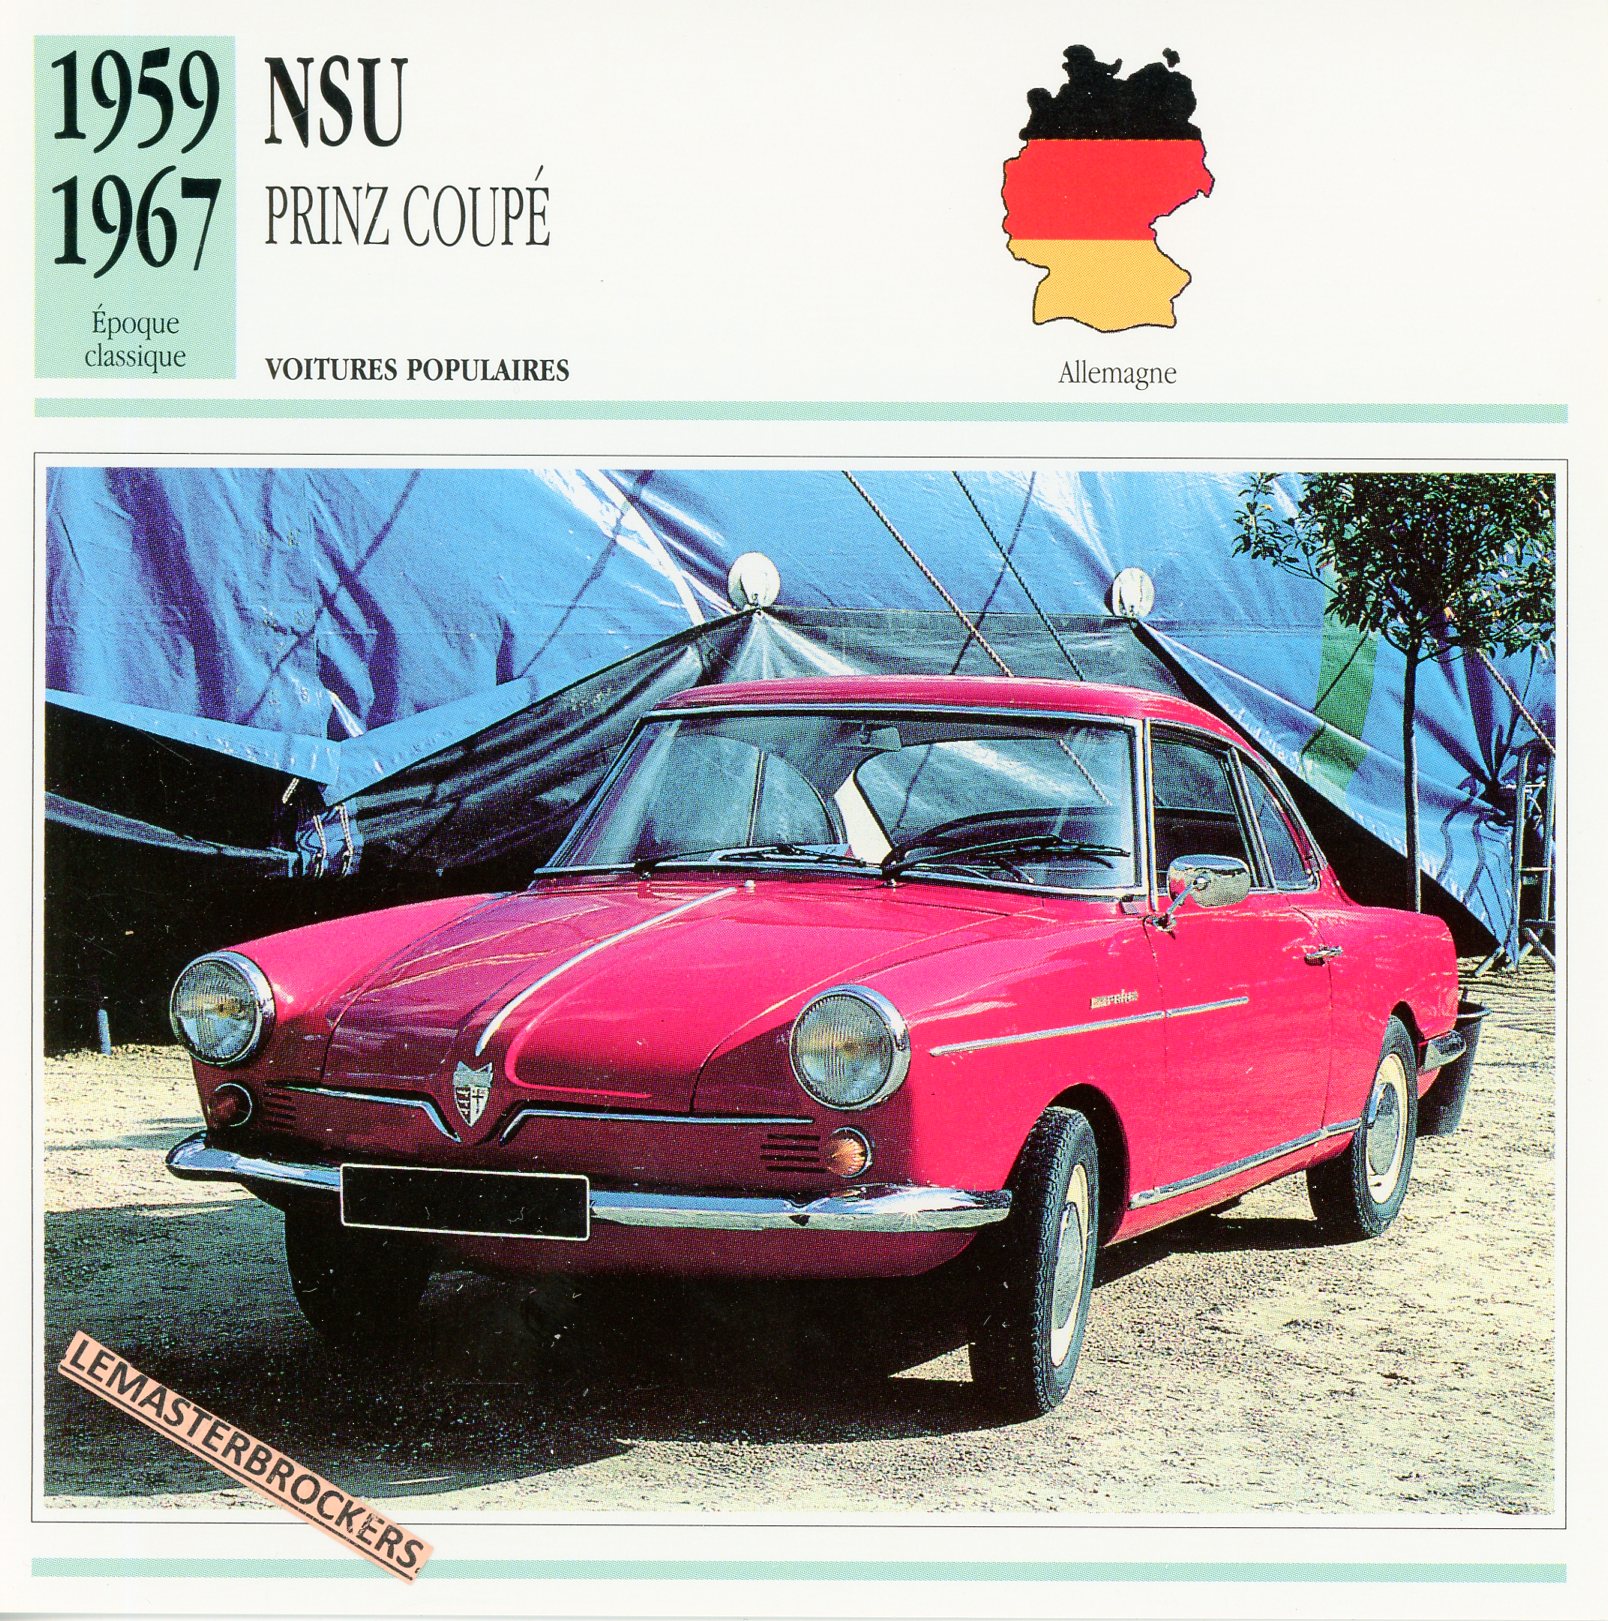 FICHE-NSU-PRINZ-COUPE-LEMASTERBROCKERS-FICHE-AUTO-CARS-CARD-ATLAS-FRENCH